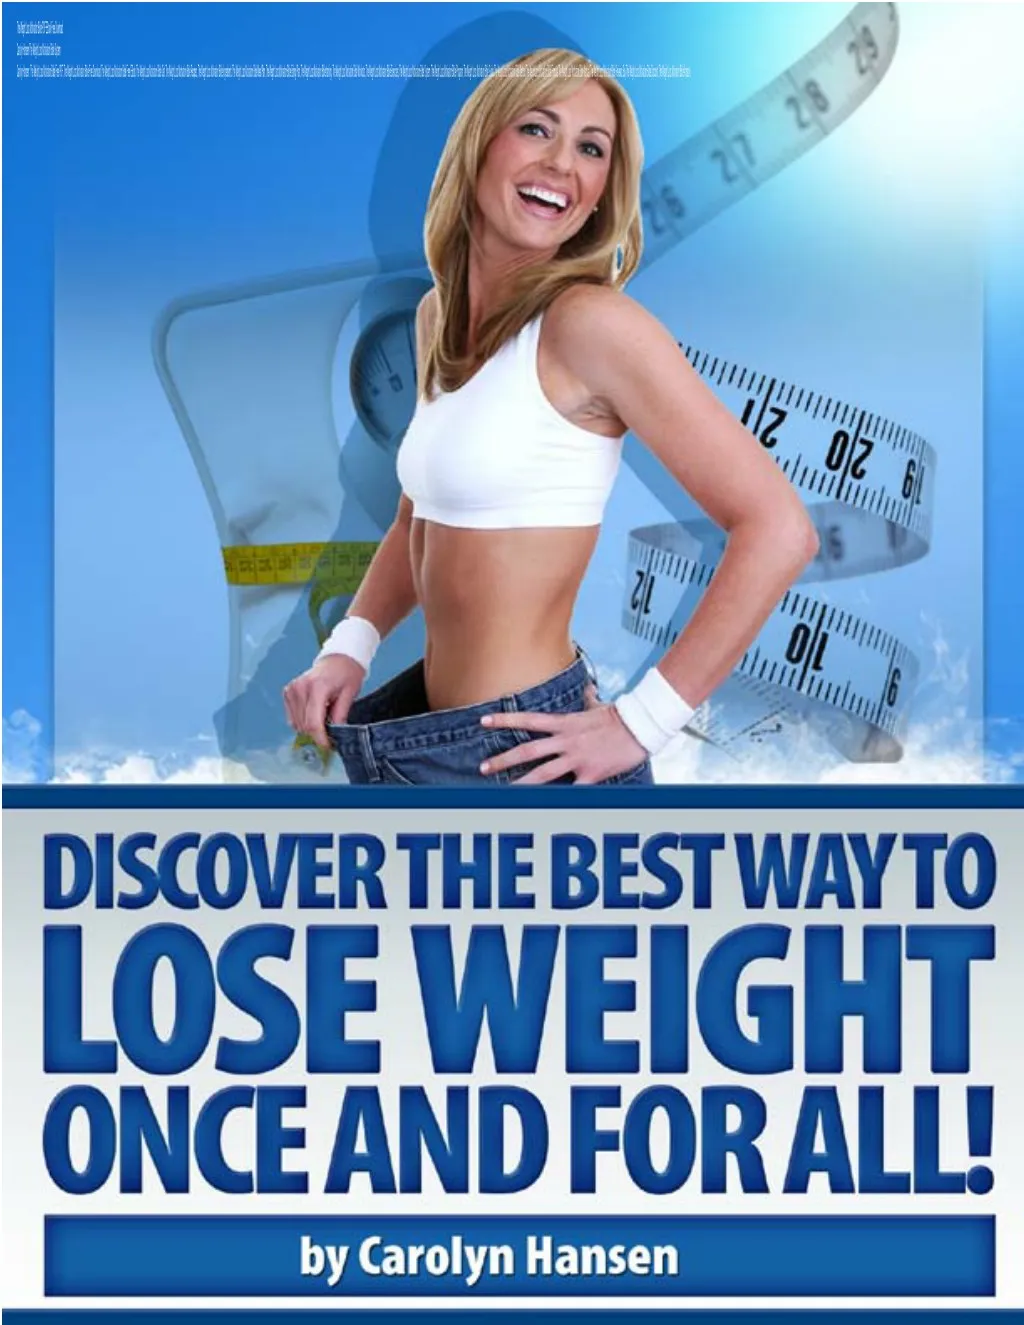 the weight loss motivation bible pdf ebook free